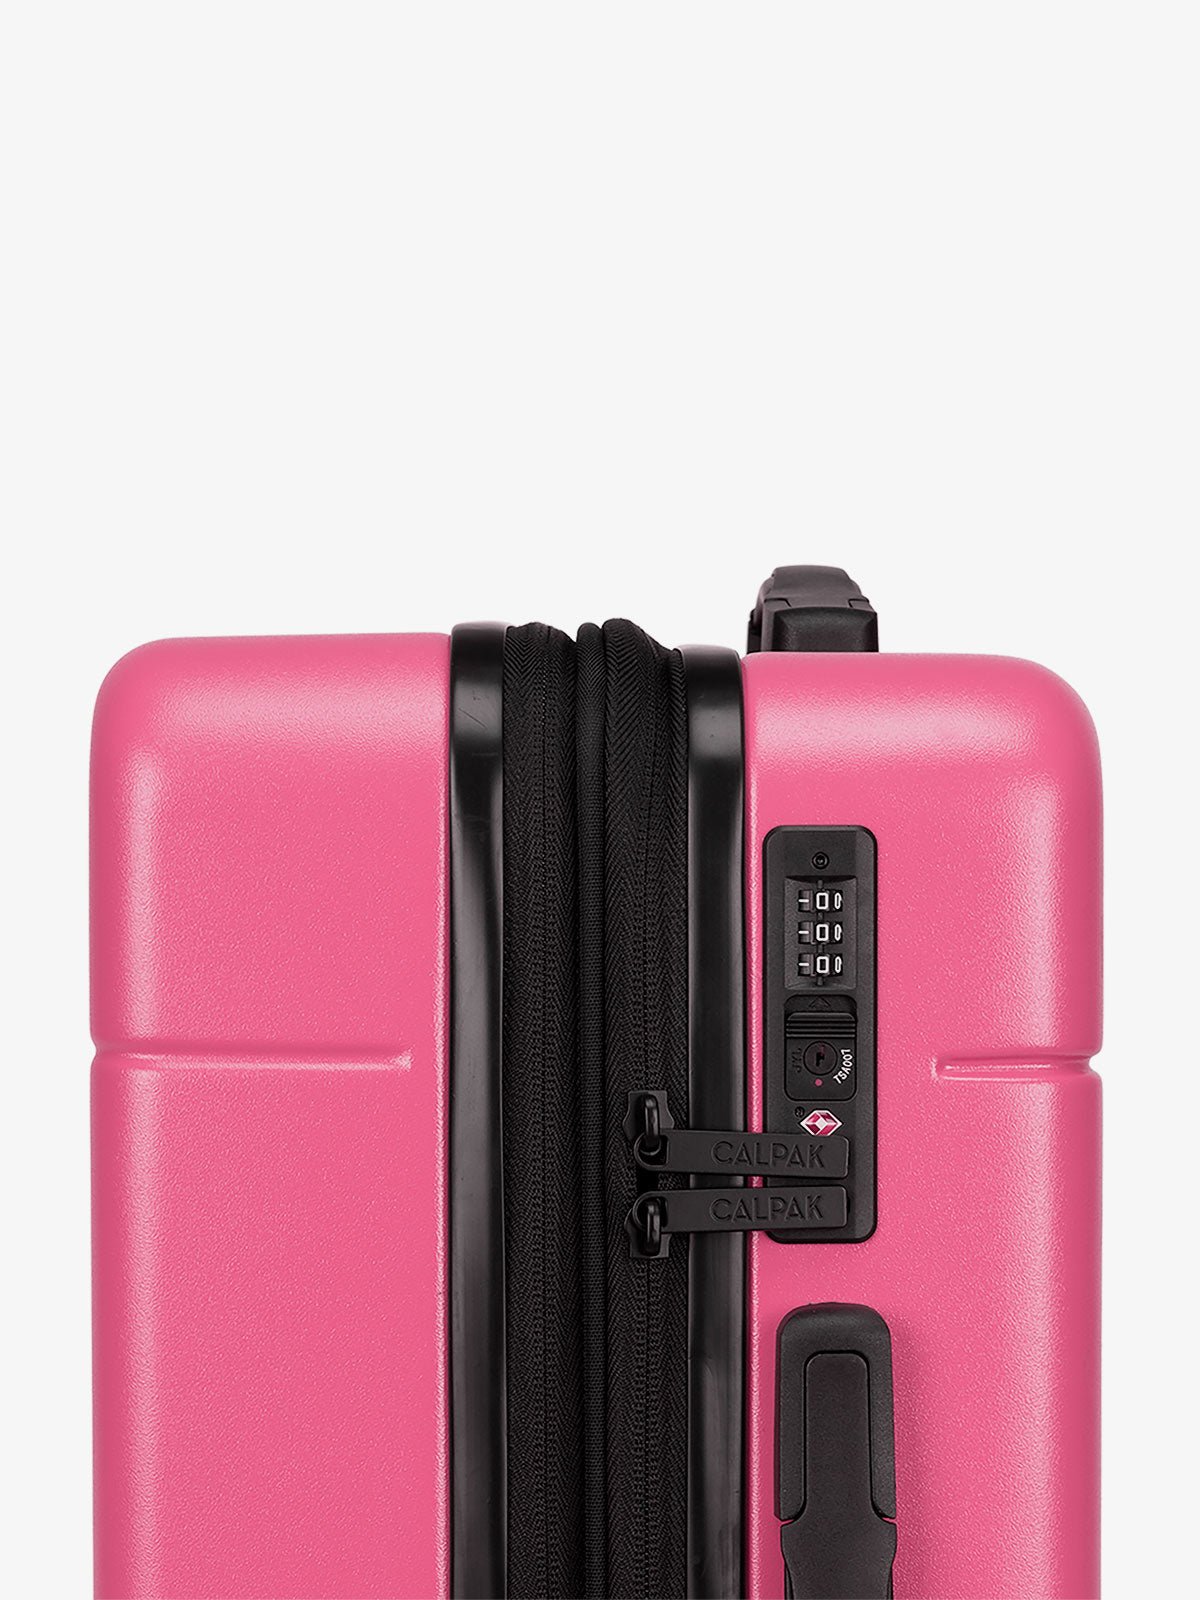 Hot pink dragonfruit Hue rolling carry-on suitcase with TSA locks